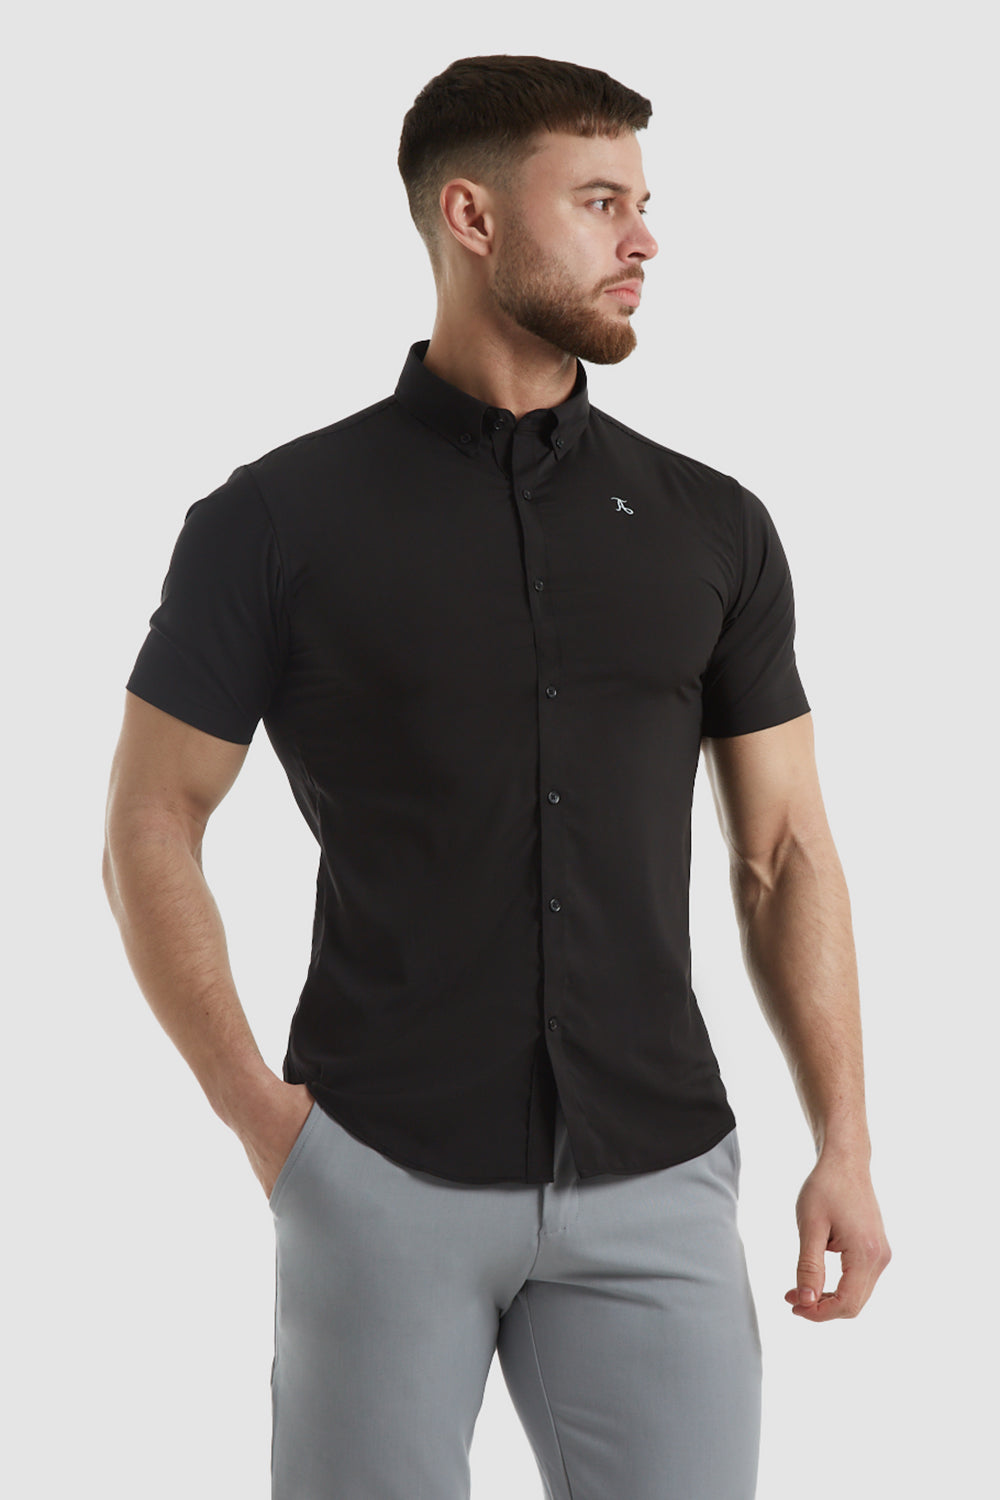 (SS) Signature USA Black Shirt - in - Care ATHLETE Easy TAILORED